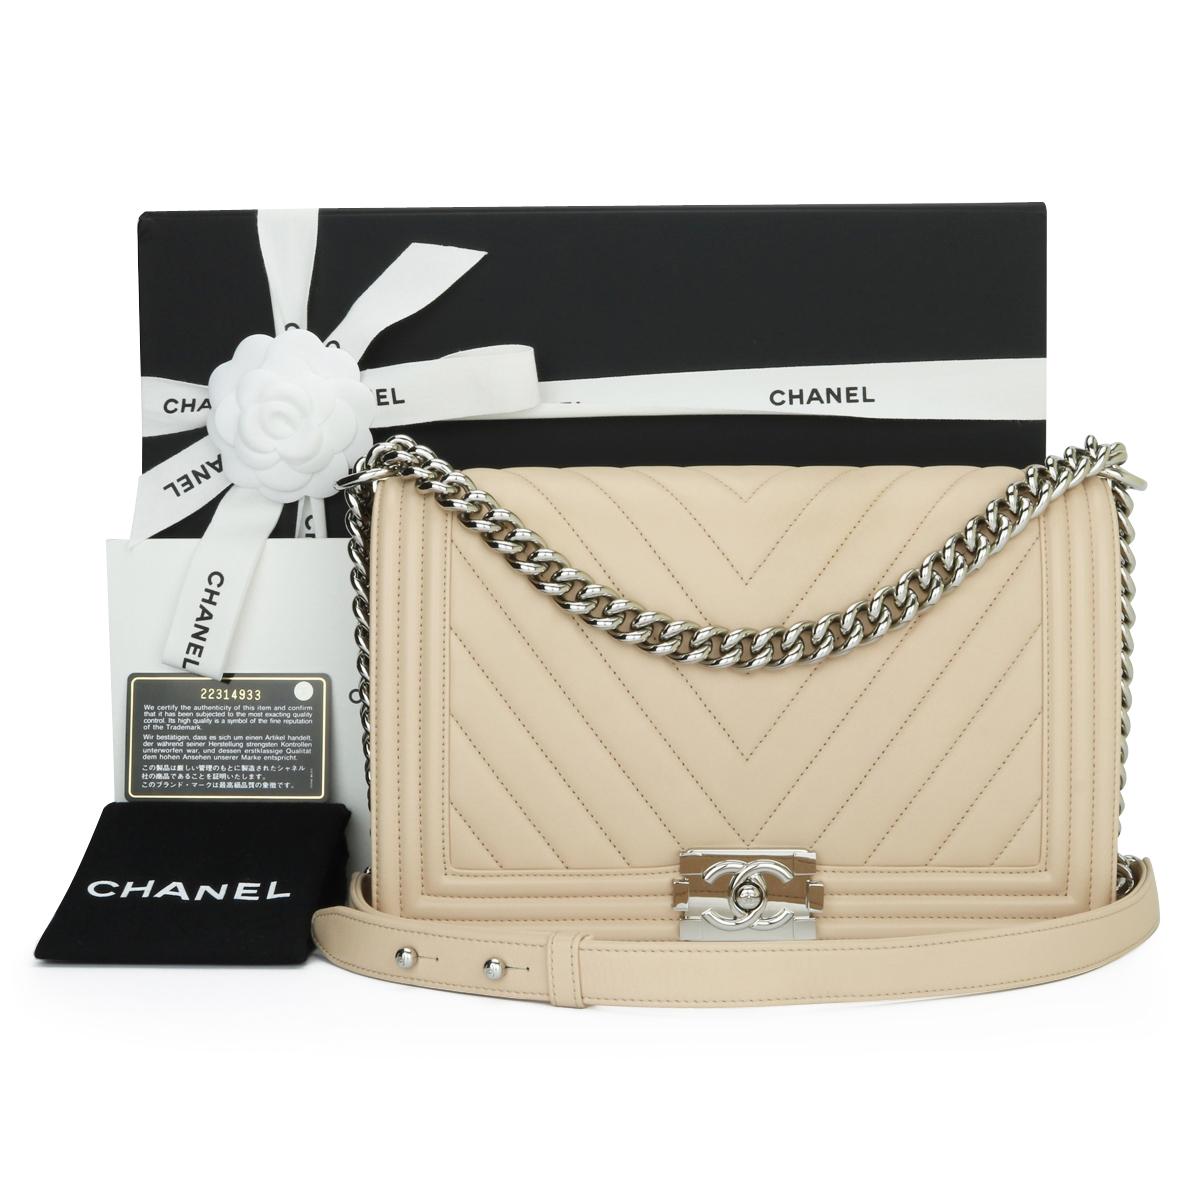 CHANEL New Medium Chevron Boy Bag Nude Calfskin with Silver Hardware 2016.

This stunning bag is still in excellent condition, the bag still holds its original shape and the hardware is still very clean and shiny.

- Exterior Condition: Excellent